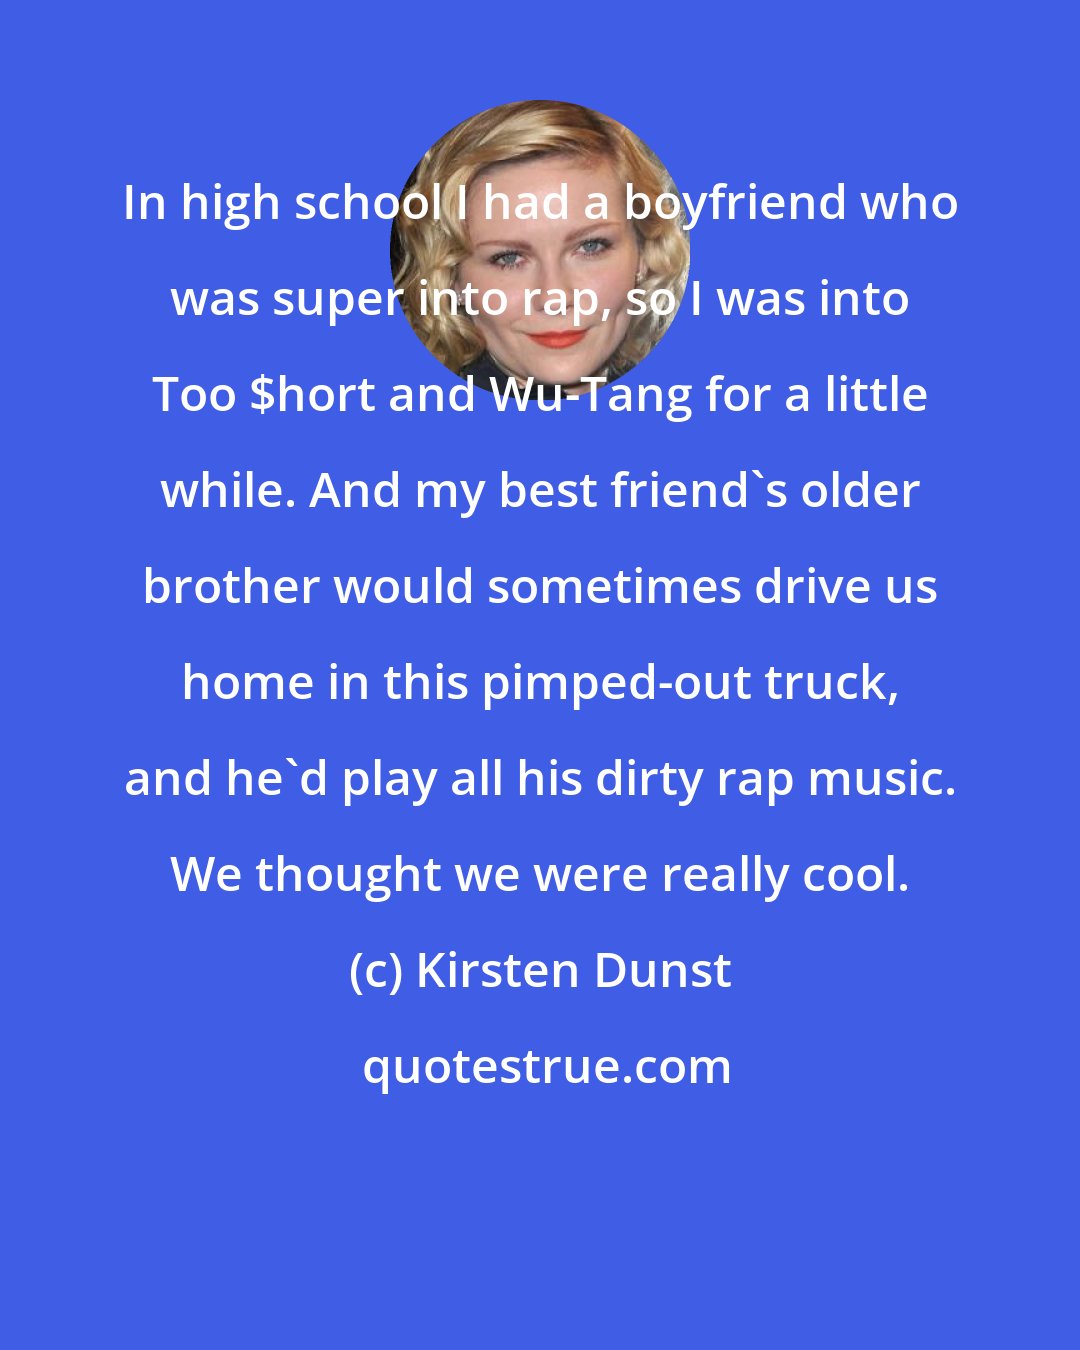 Kirsten Dunst: In high school I had a boyfriend who was super into rap, so I was into Too $hort and Wu-Tang for a little while. And my best friend's older brother would sometimes drive us home in this pimped-out truck, and he'd play all his dirty rap music. We thought we were really cool.